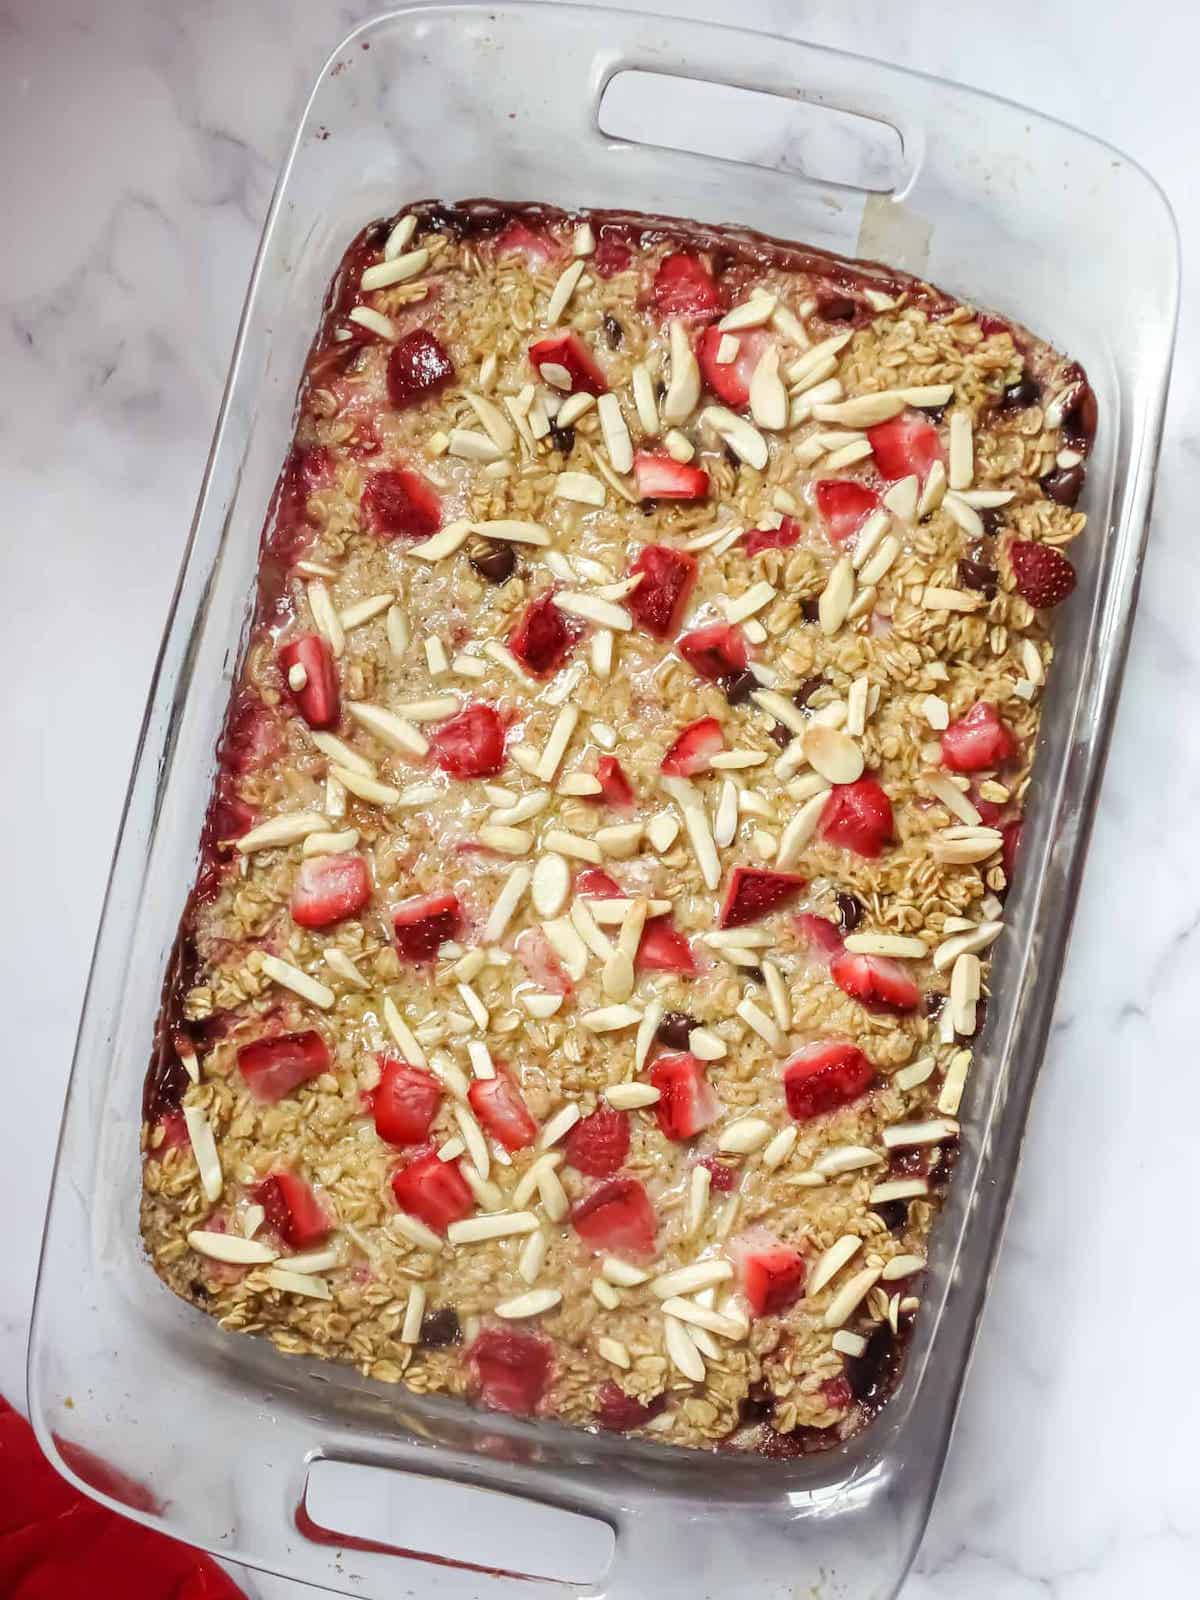 baked strawberry oatmeal in a glass baking dish on a white background